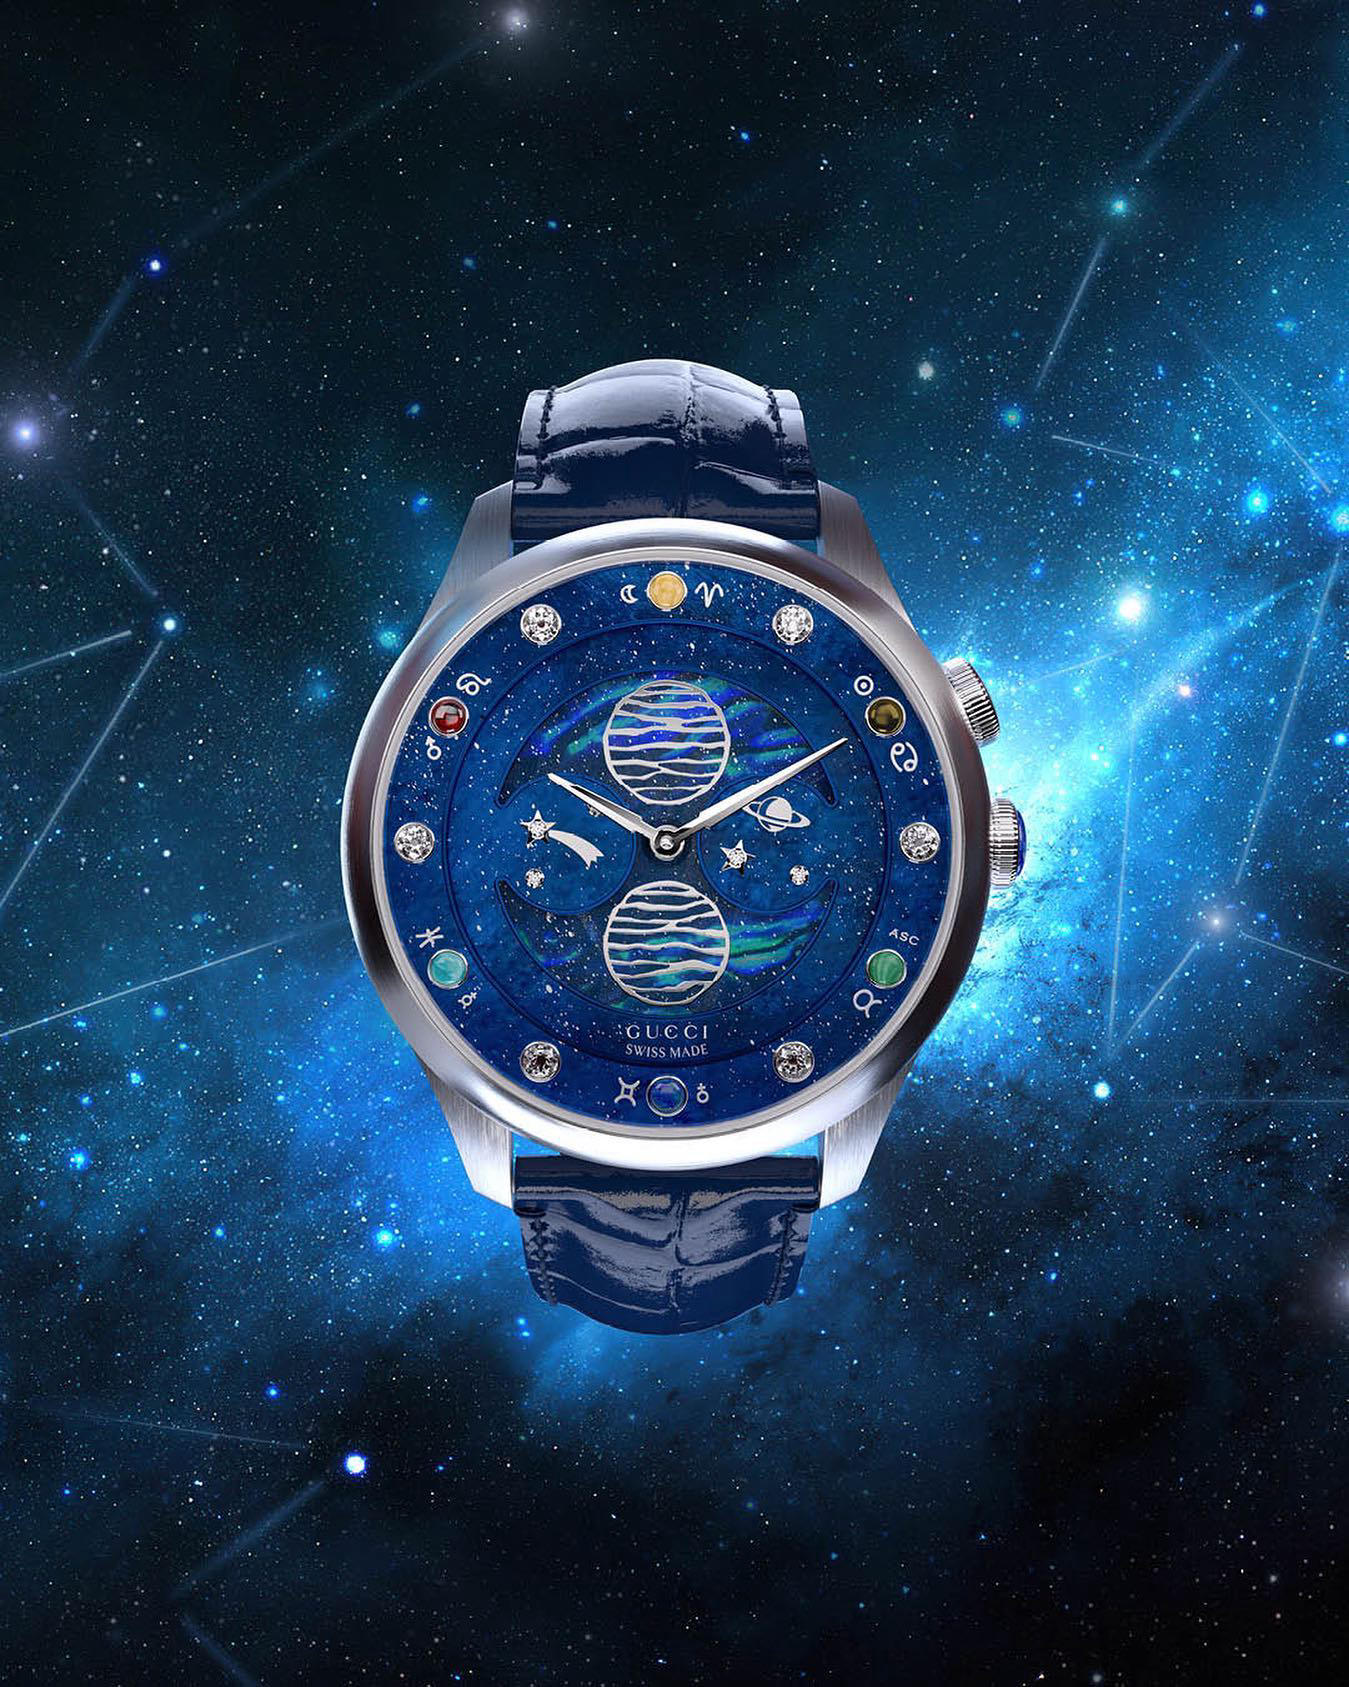 In the latest’s High Watchmaking collection, the made-to-order G-Timeless Moonlight allows for perso